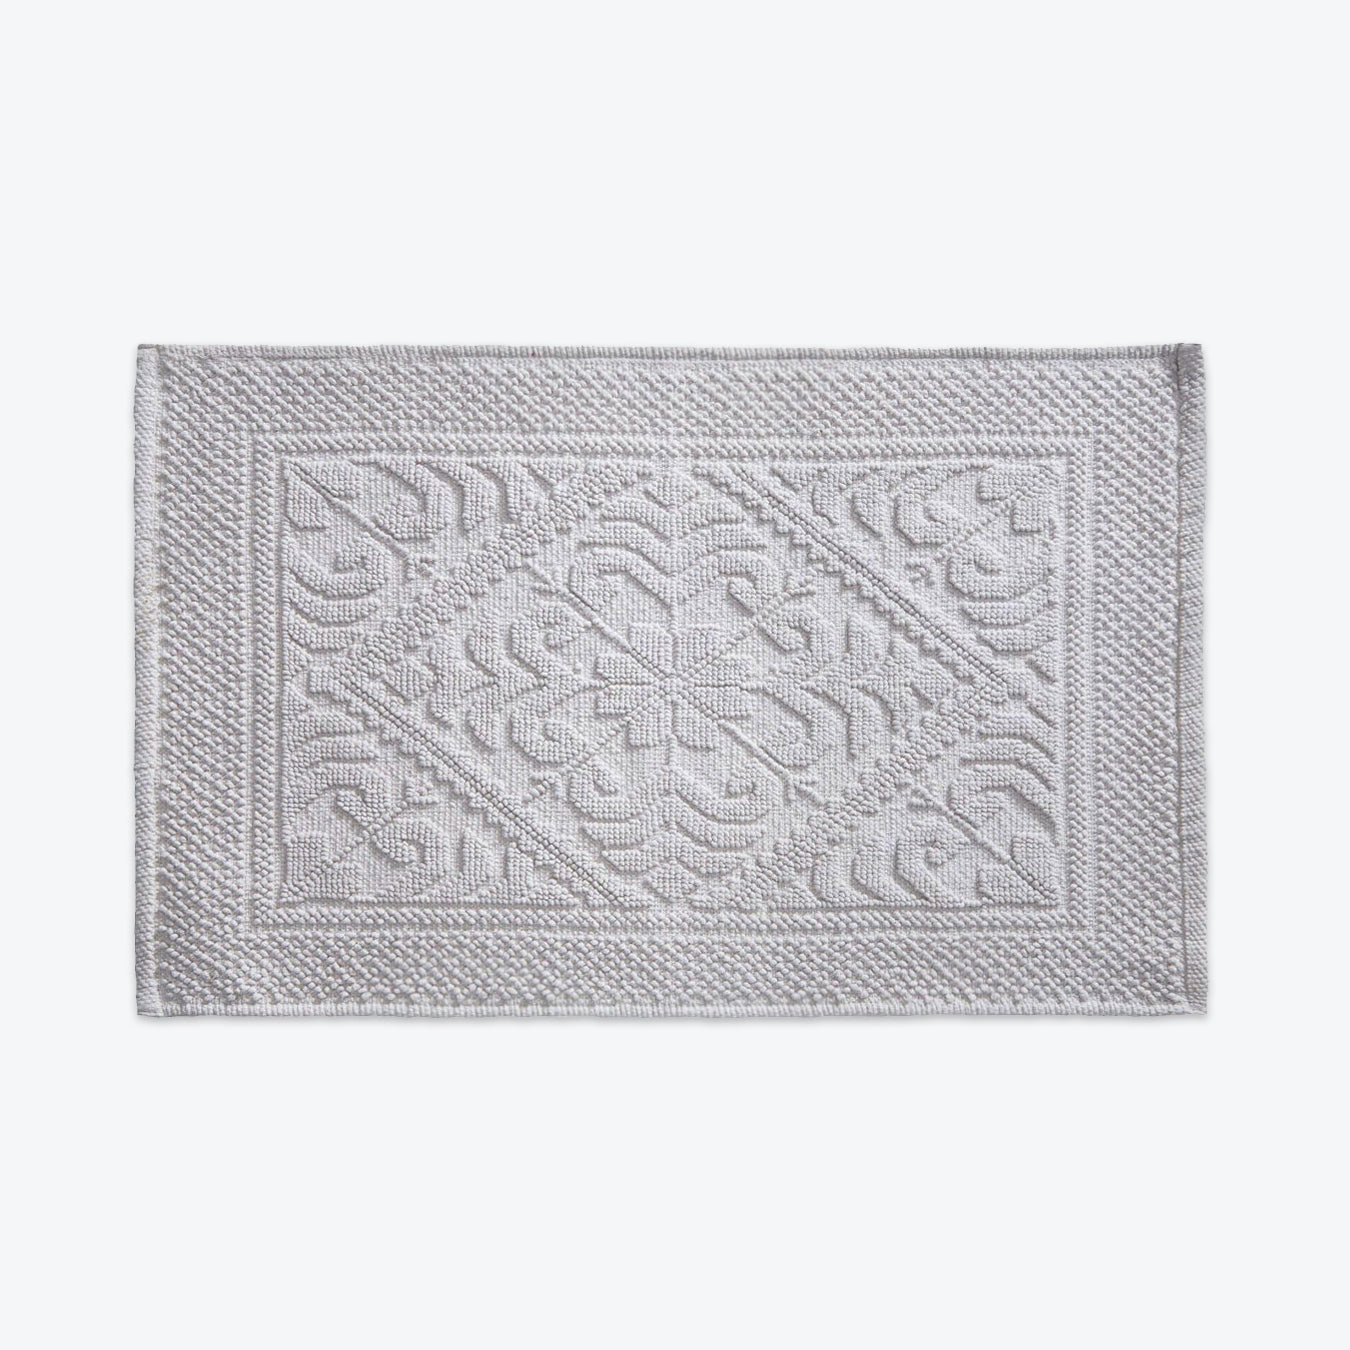 Grey Country House Bath Mat - Textured Cotton Rug